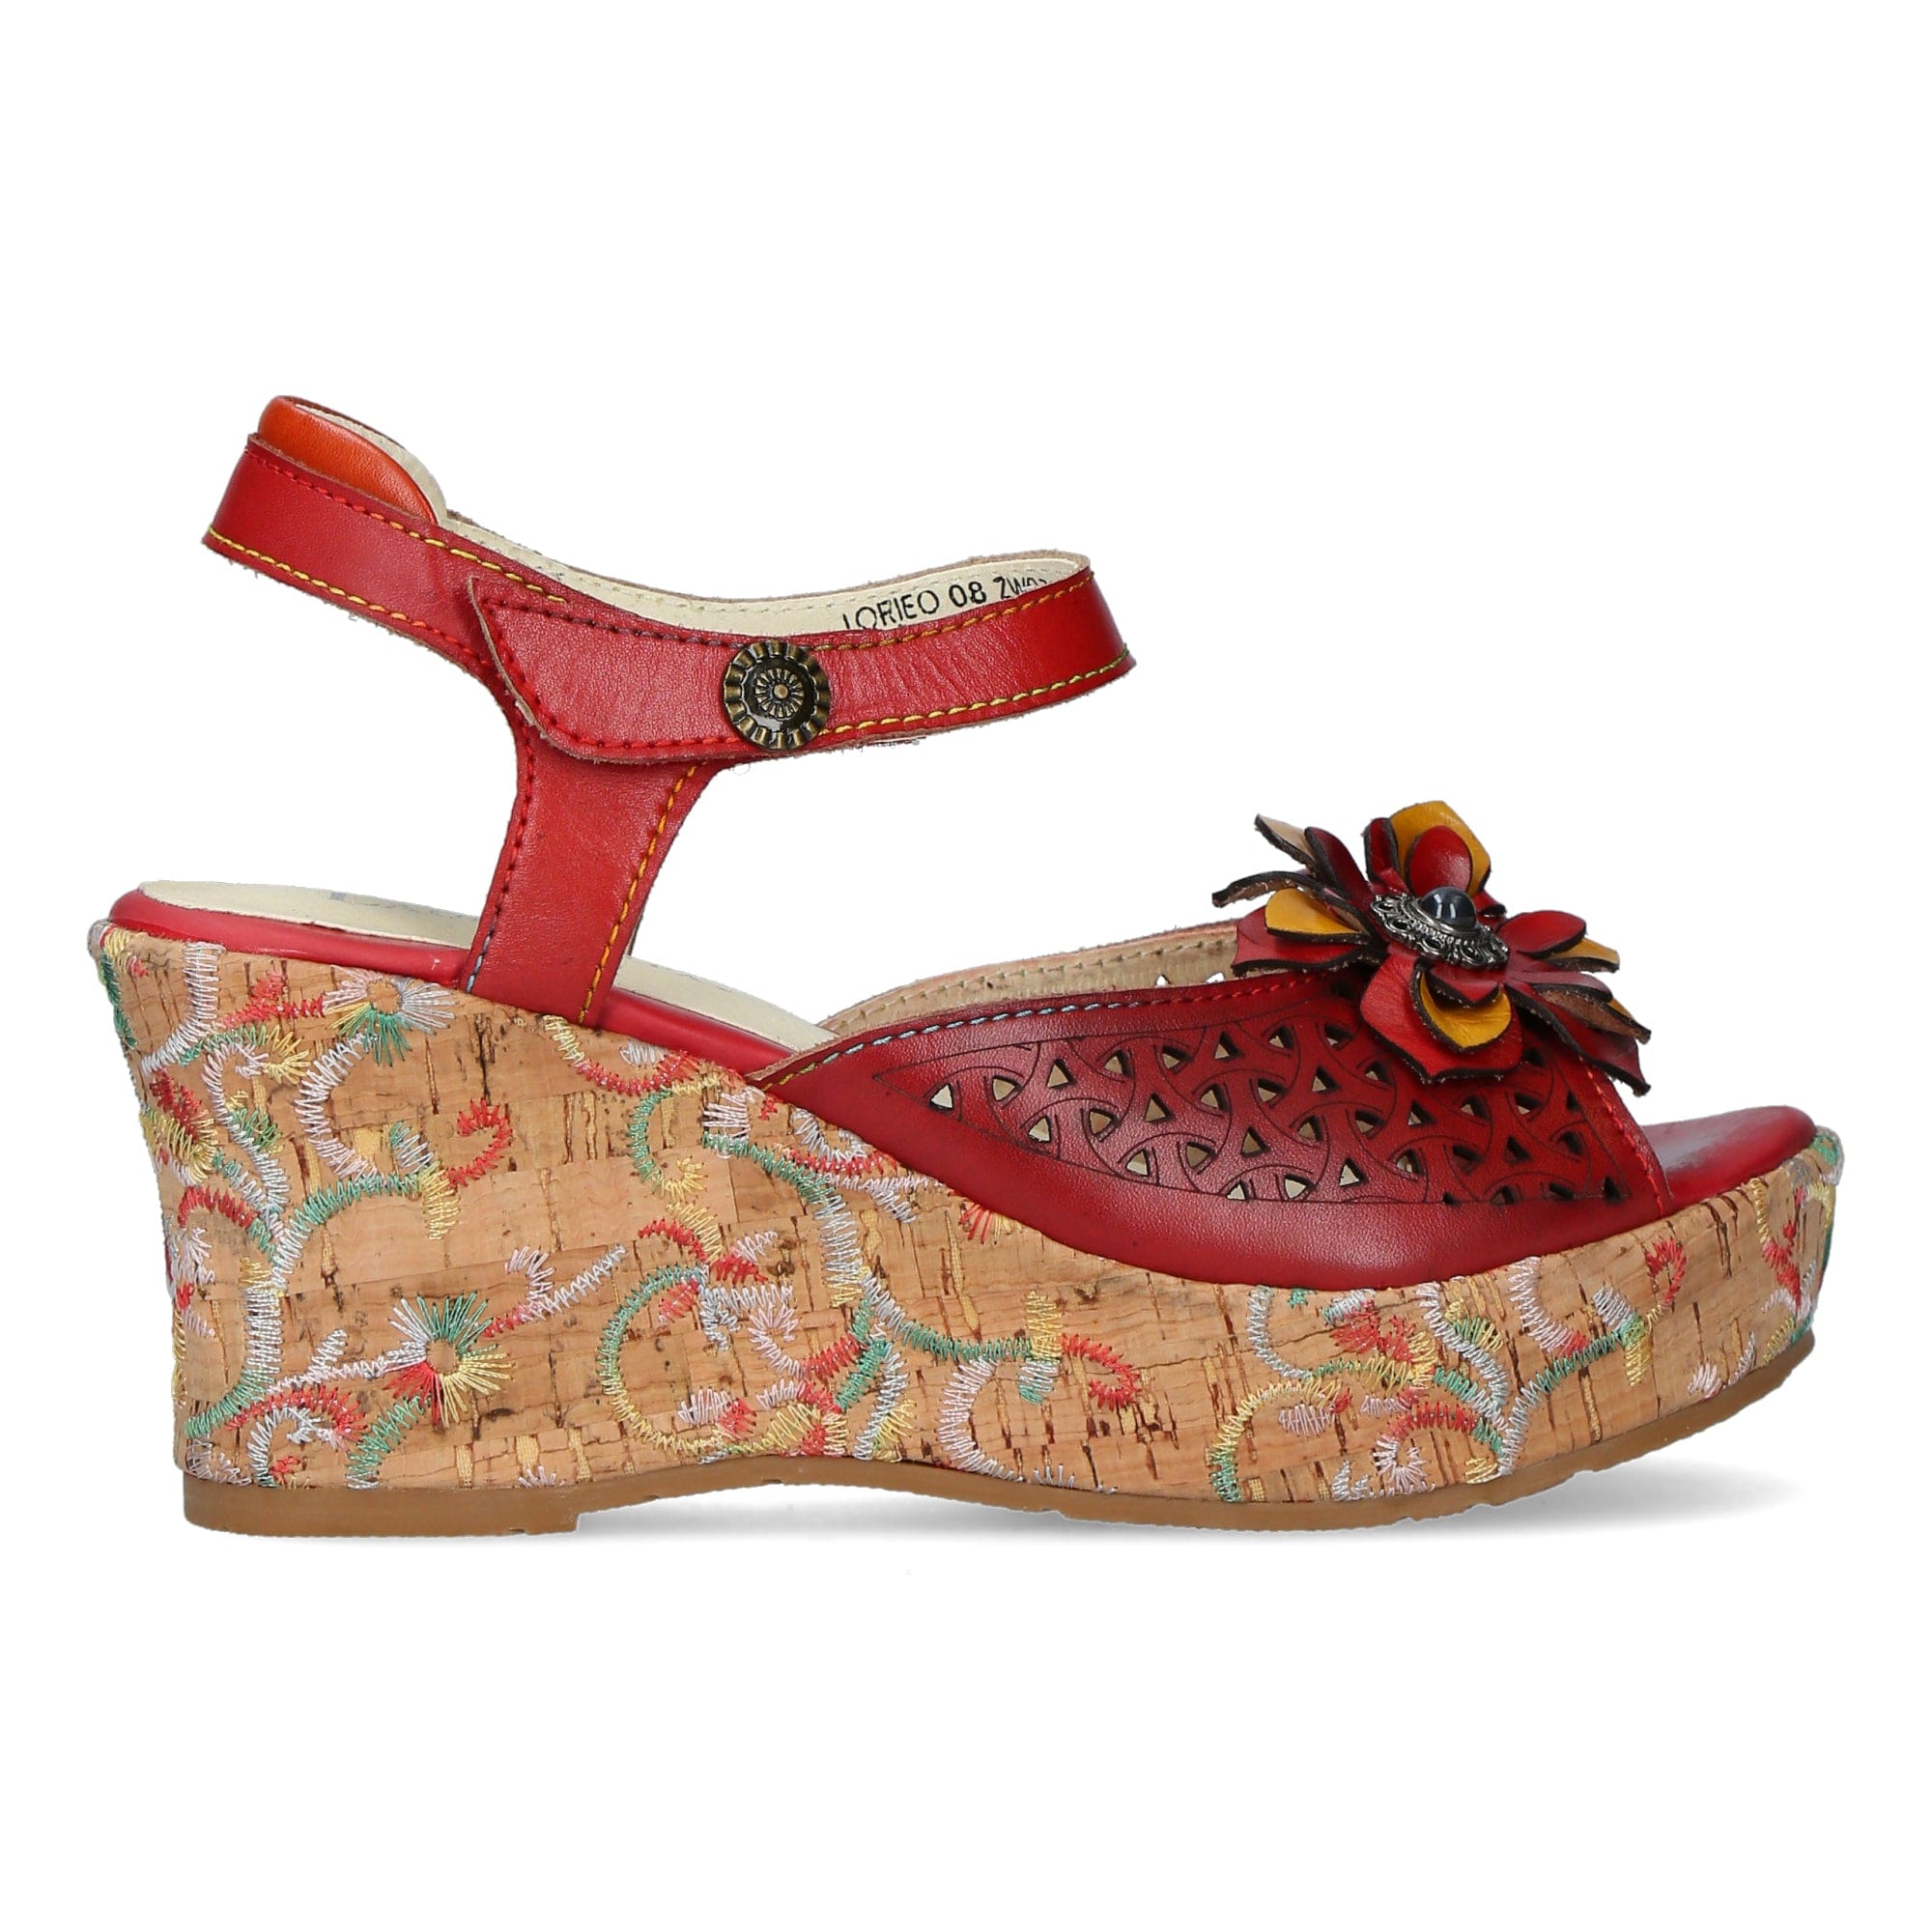 LORIEO 08 shoes - 35 / Red - Sandal